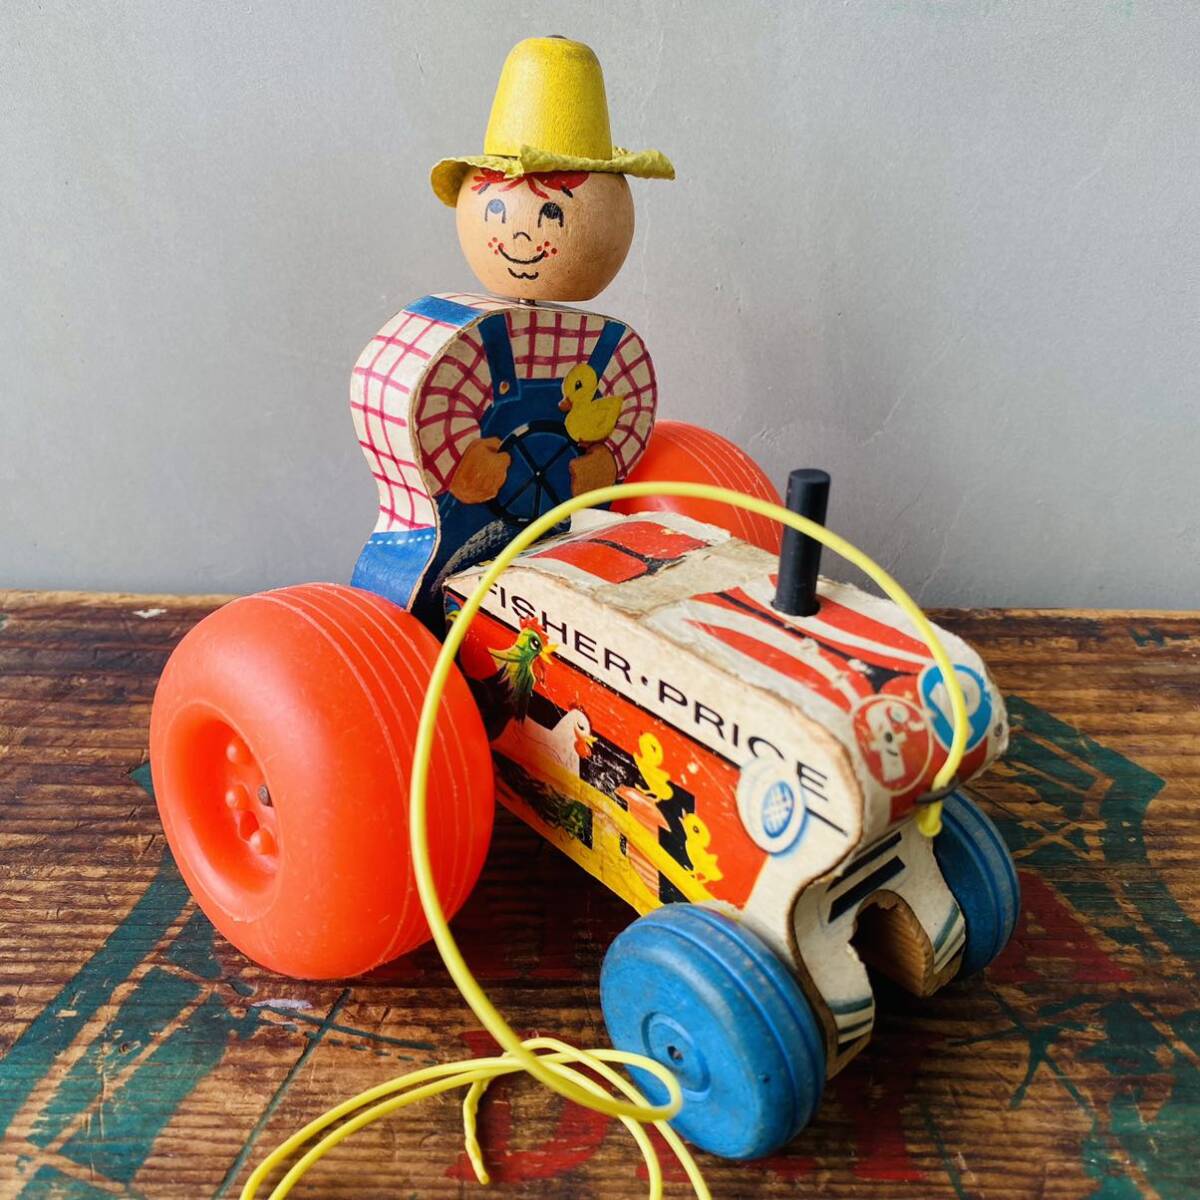 【1961 USA vintage】FISHER・PRICE tractor pull toy フィッシャープライス プルトイ_画像1